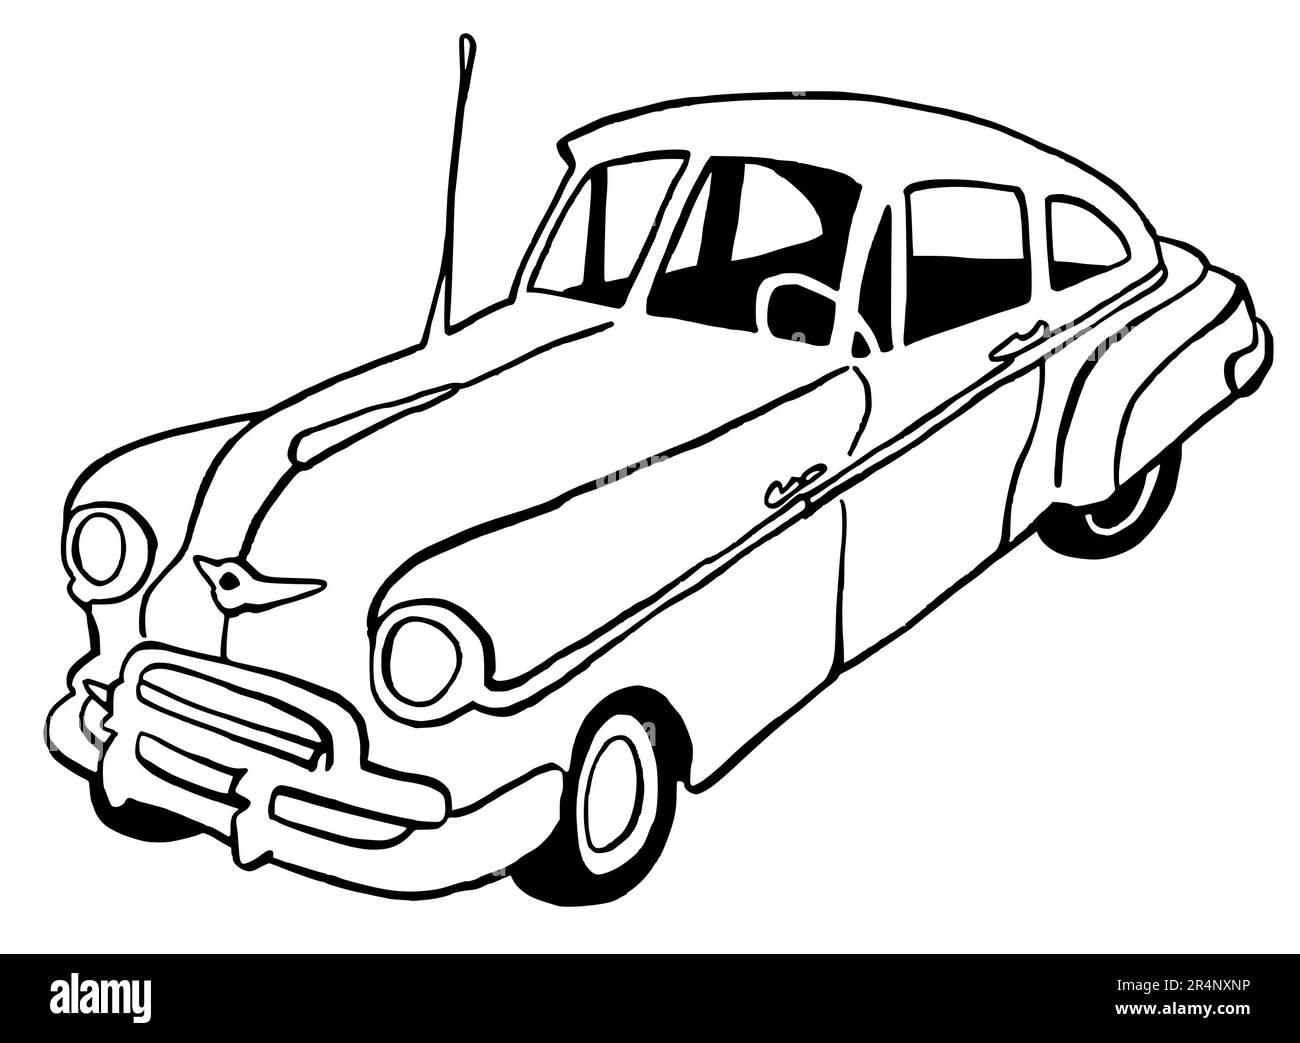 Hand drawn Illustration of a Retro Car, American, Full sized, isolated on a white background, with black line art Stock Photo